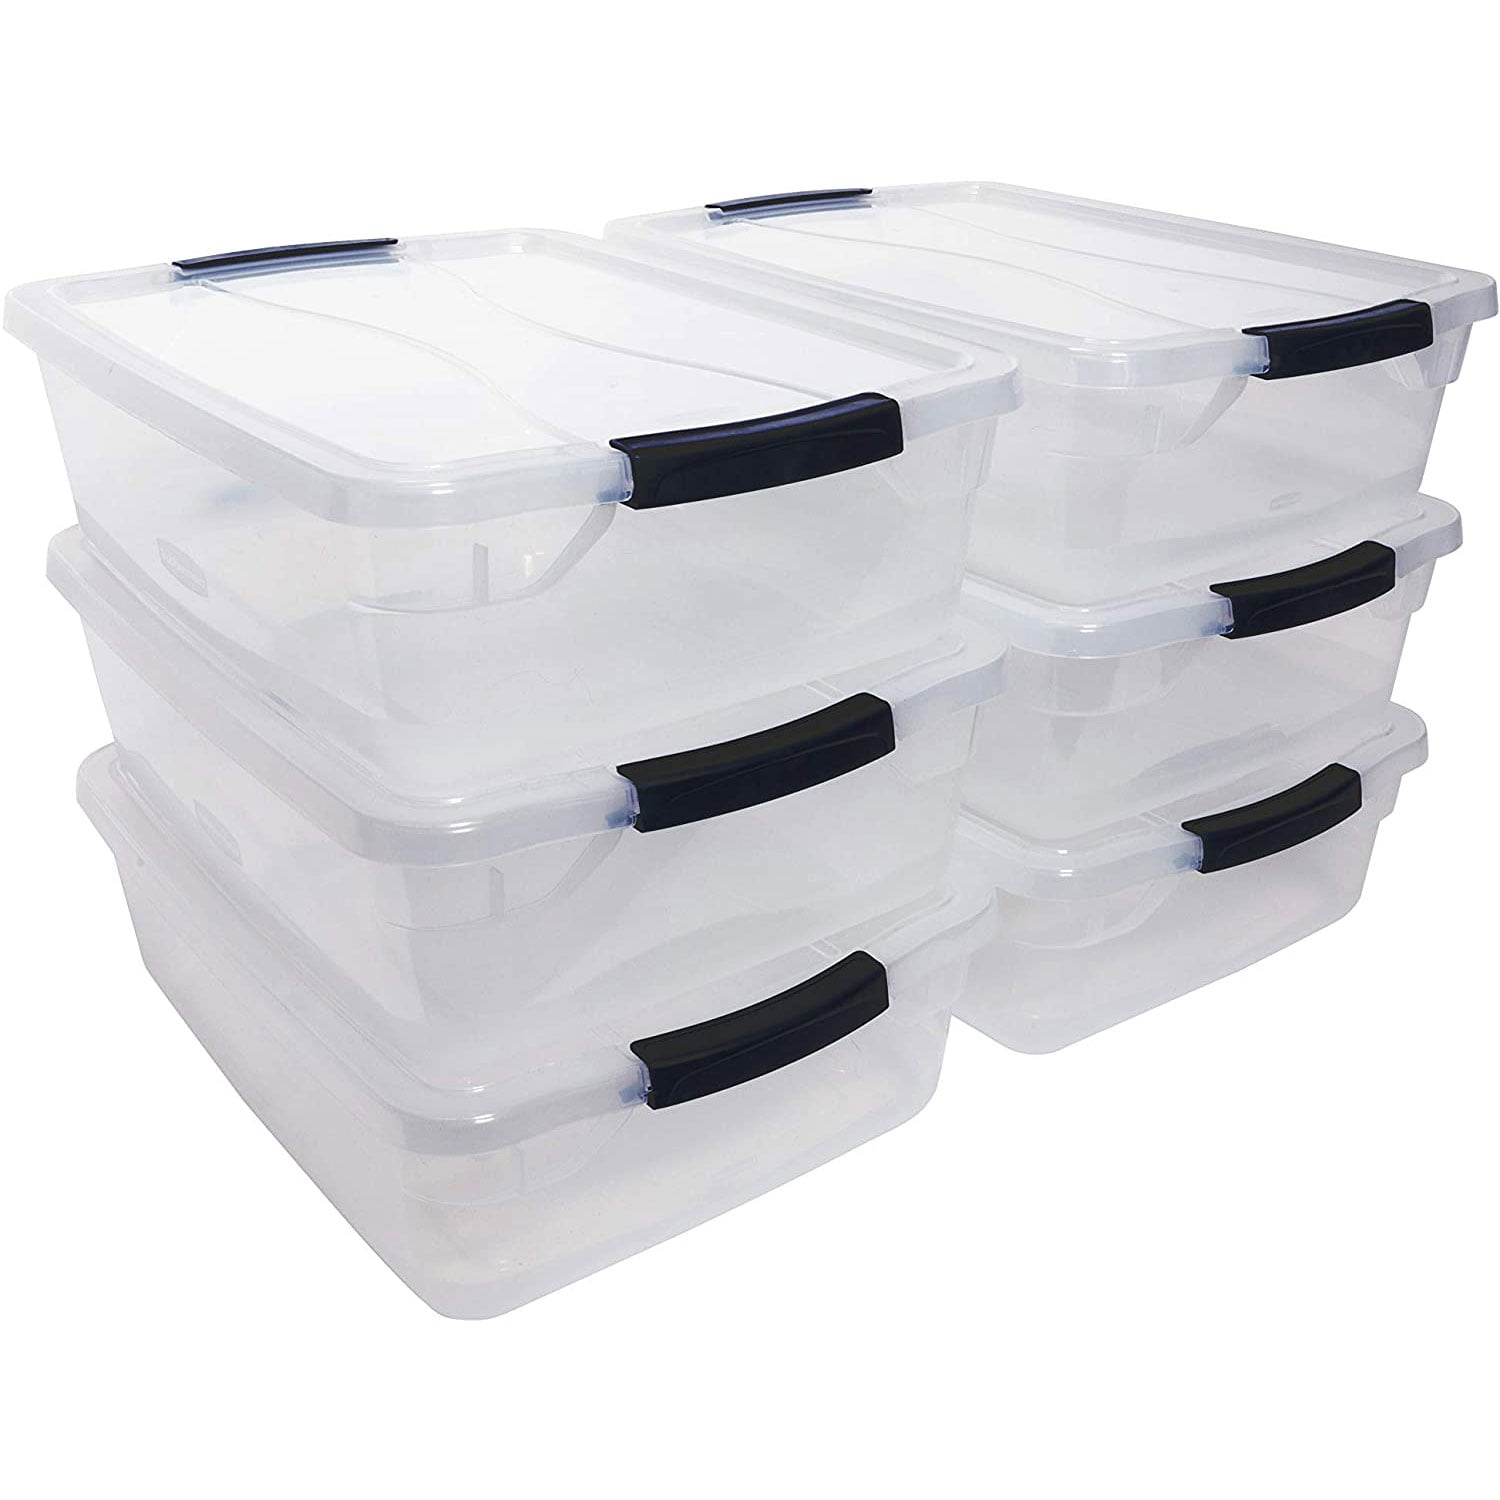 Rubbermaid Cleverstore 16 Quart Plastic Storage Tote Container with Lid